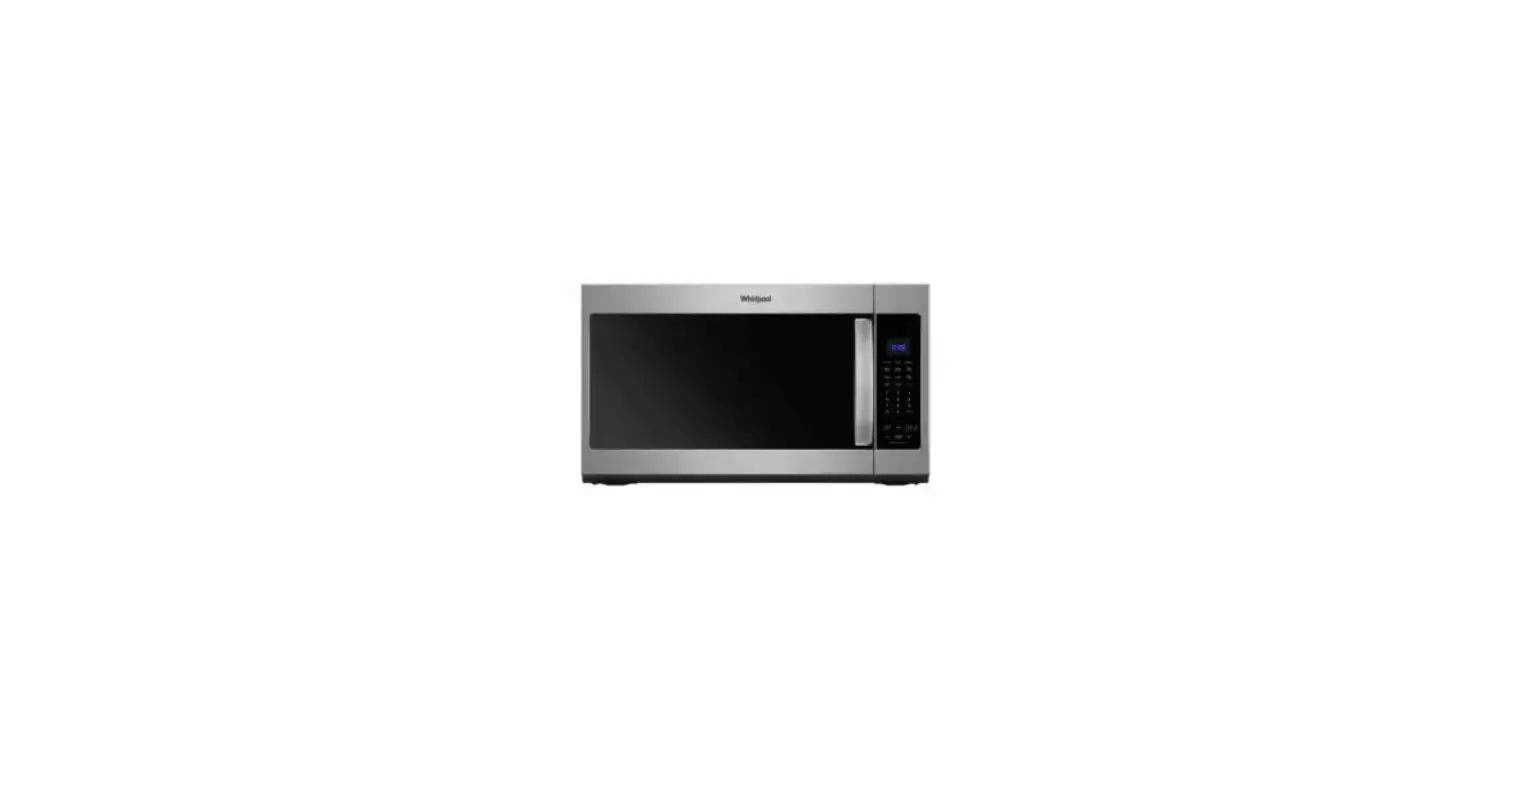 Whirlpool 1.9 cu.ft. Over-the-Range Microwave [WMH32519H] User Manual